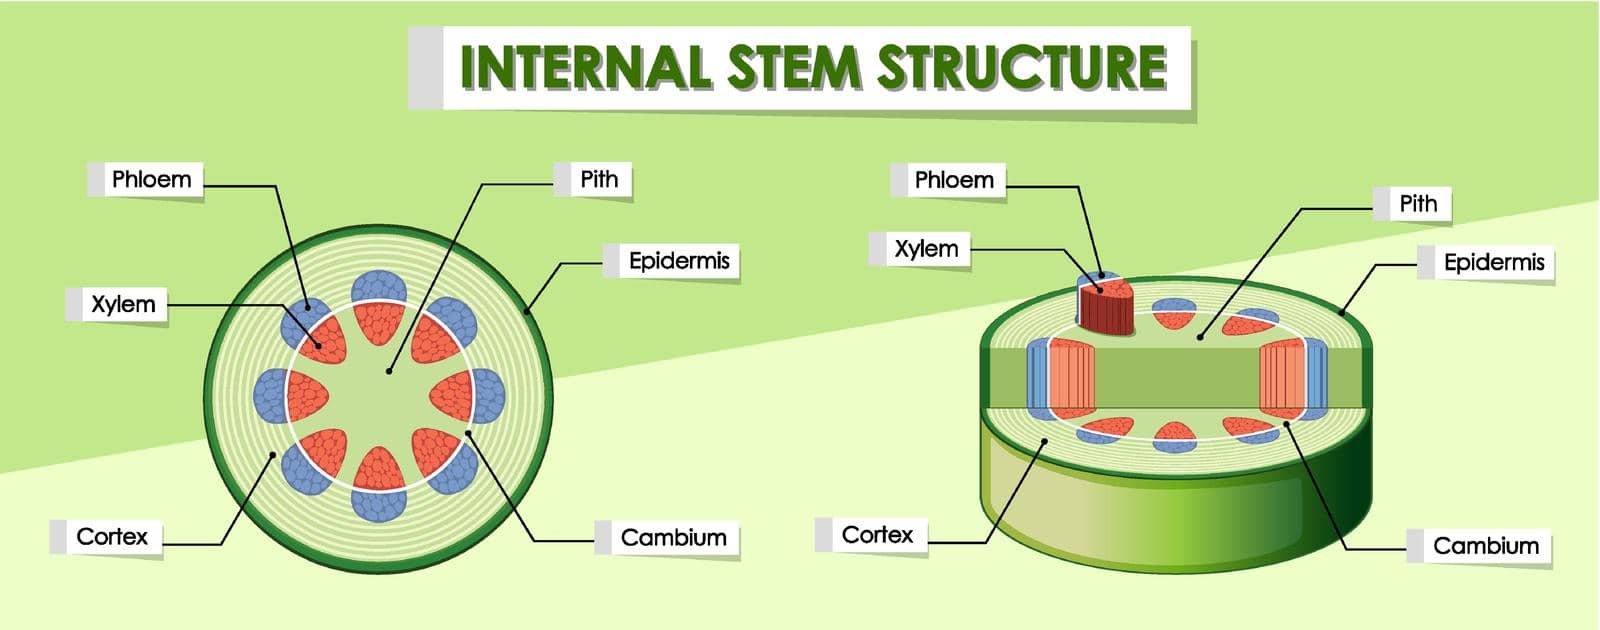 Diagram showing internal stem structure by iimages